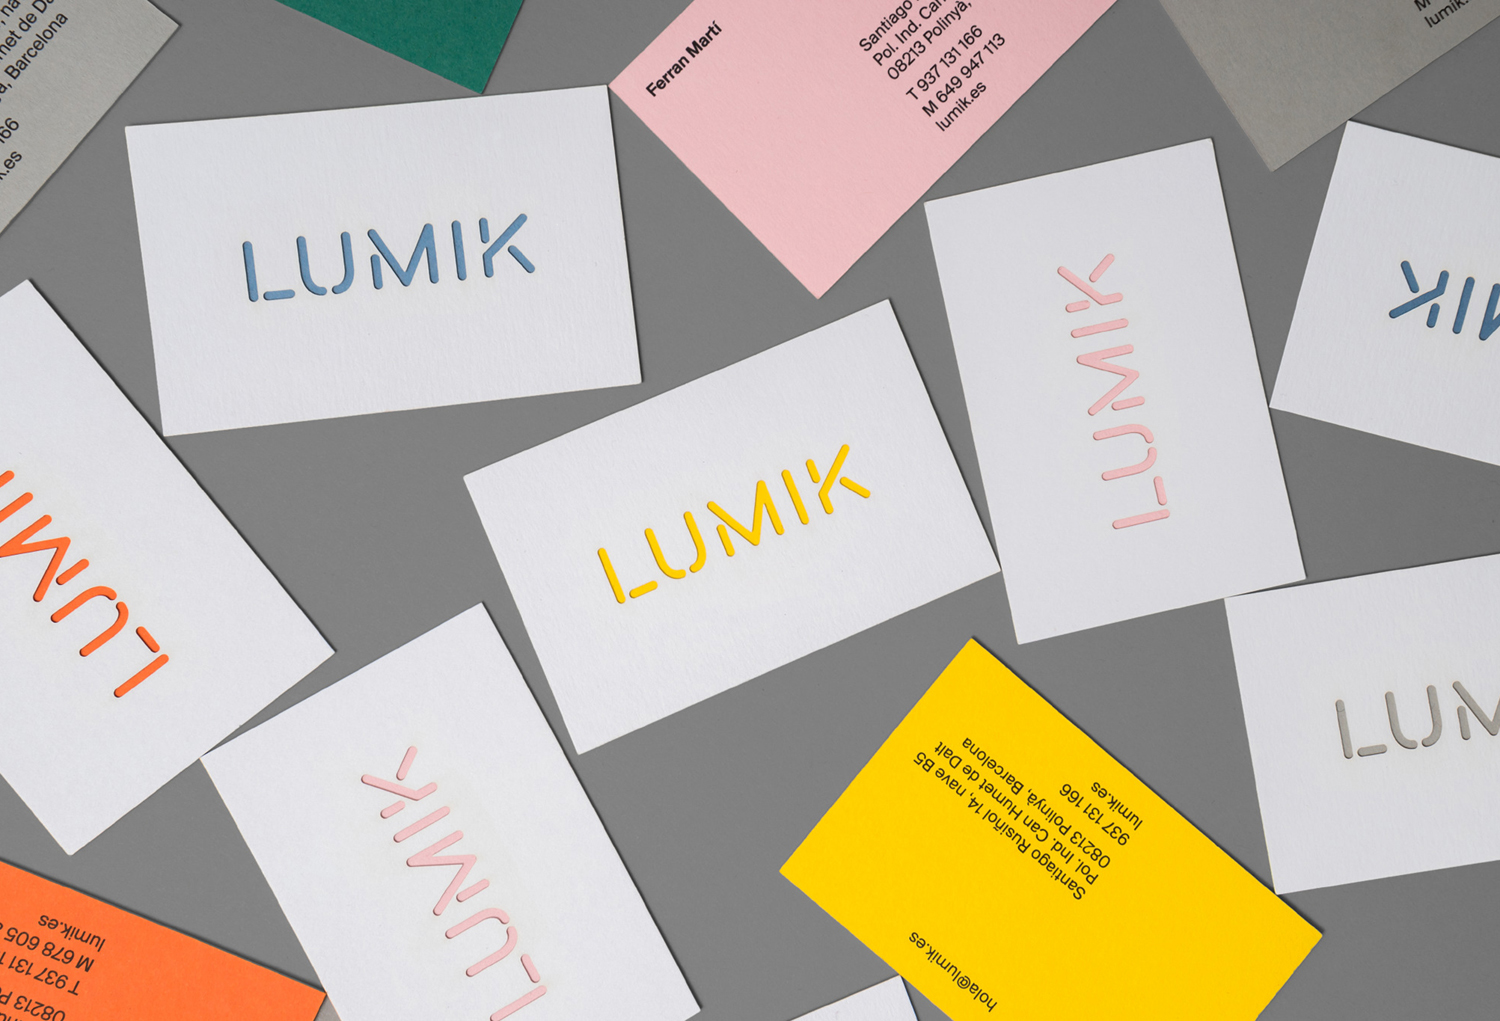 Logotype and duplex business cards design by Hey for Spanish lighting design and manufacturing company Lumik